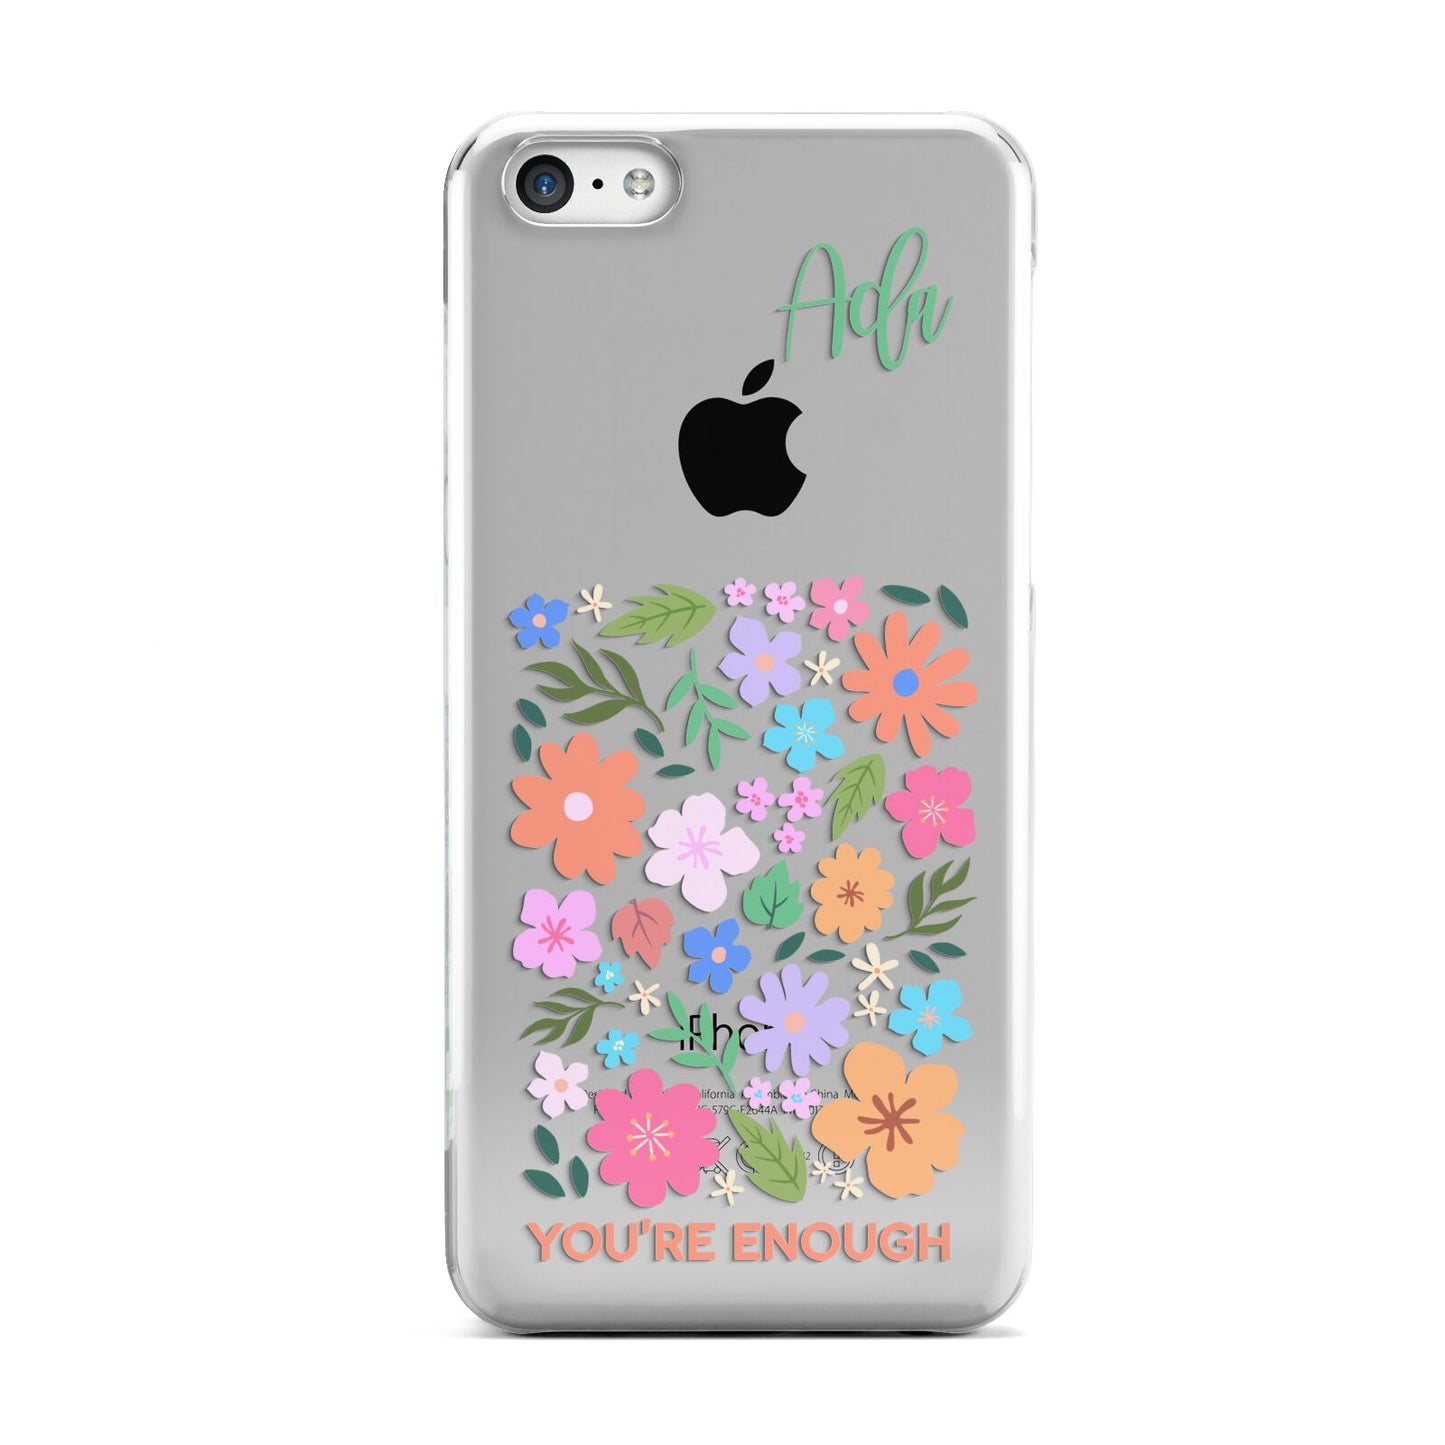 Floral Poster Apple iPhone 5c Case